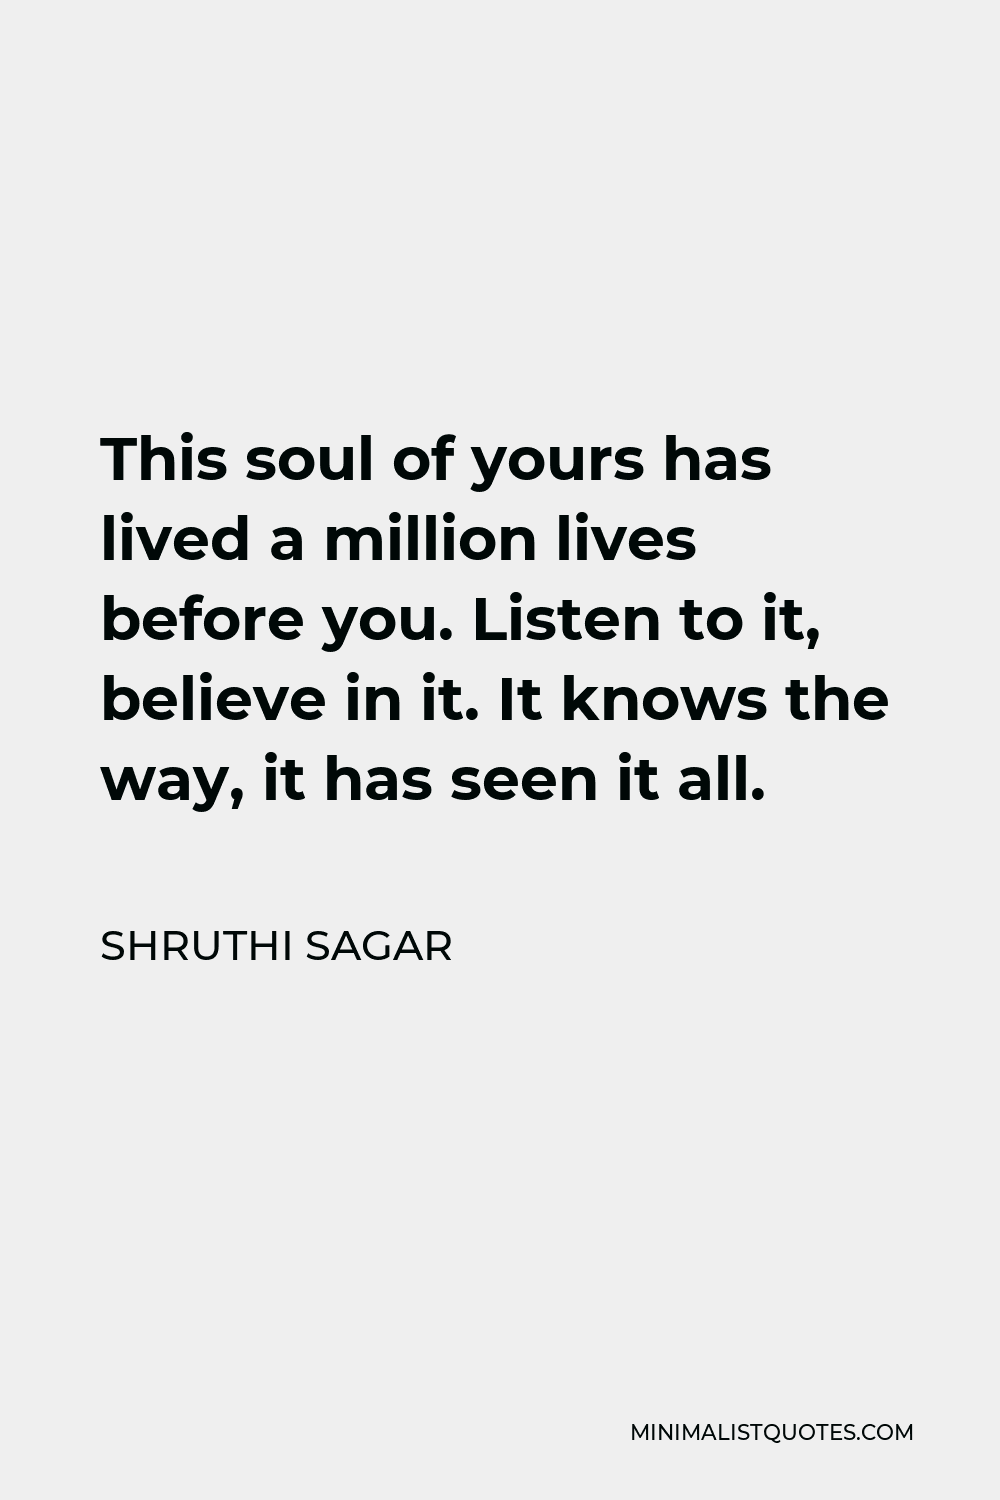 Shruthi Sagar Quote - This soul of yours has lived a million lives before you. Listen to it, believe in it. It knows the way, it has seen it all.